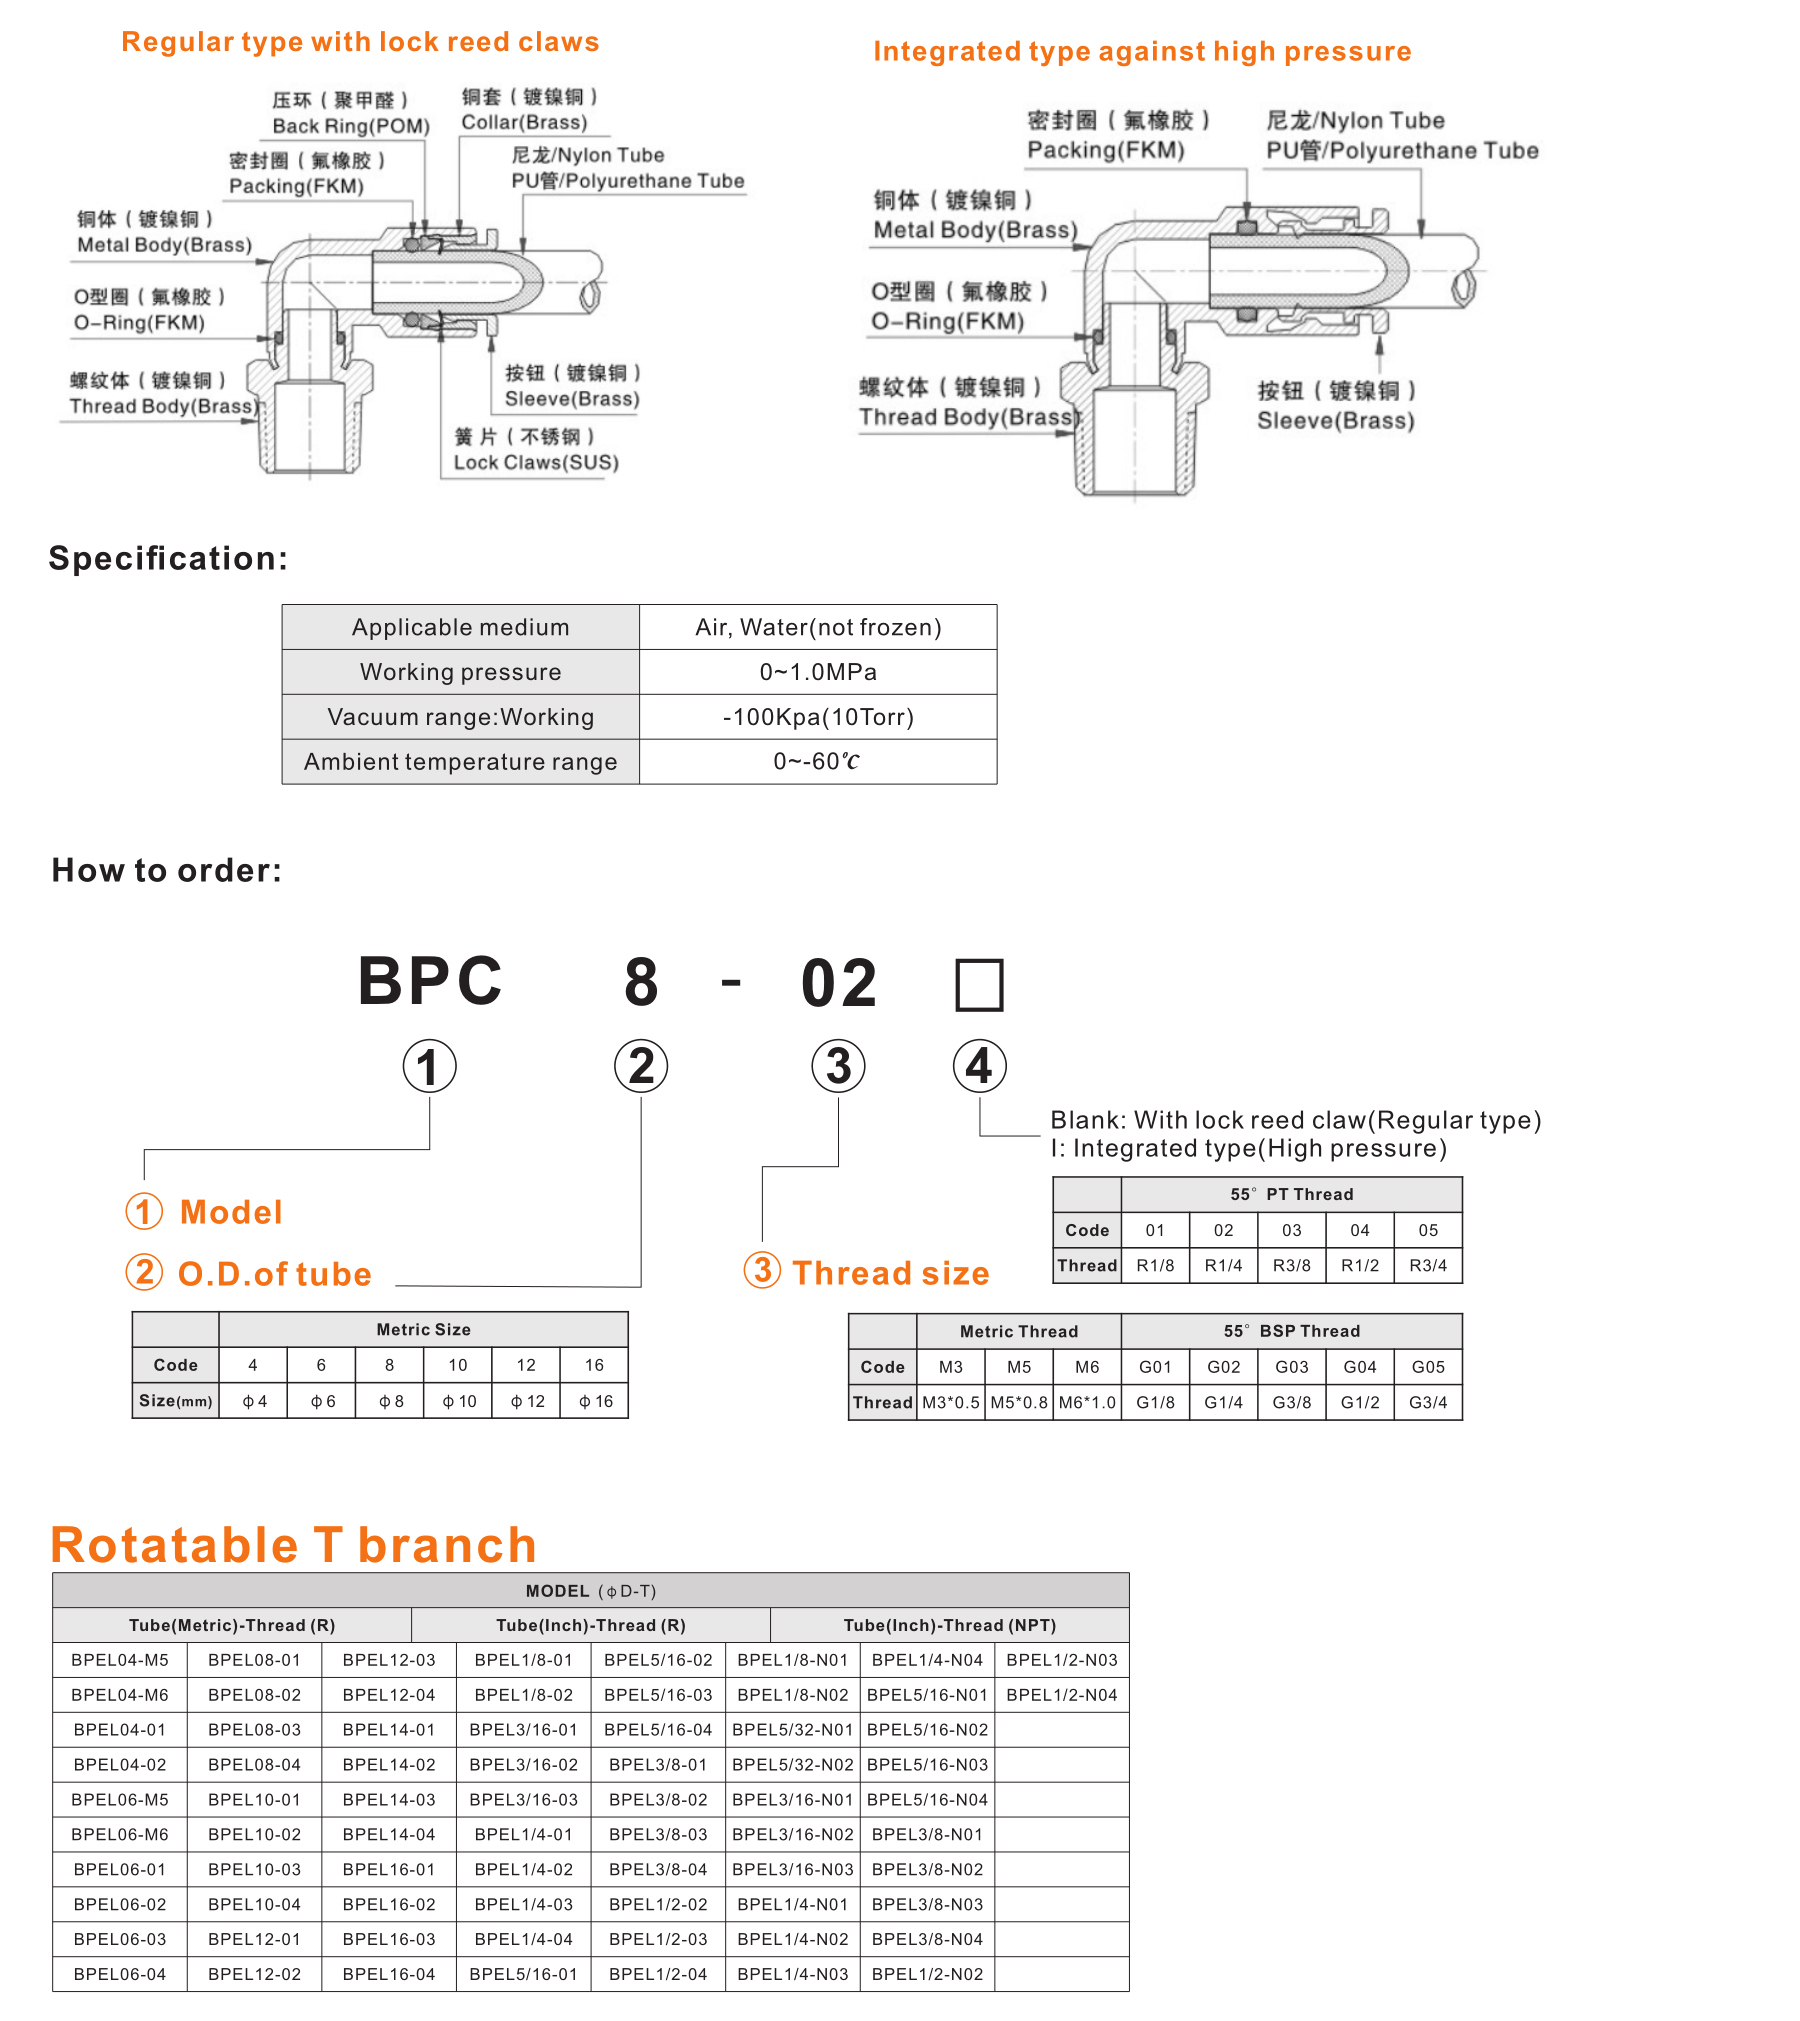 BPEL Rotatable T branch